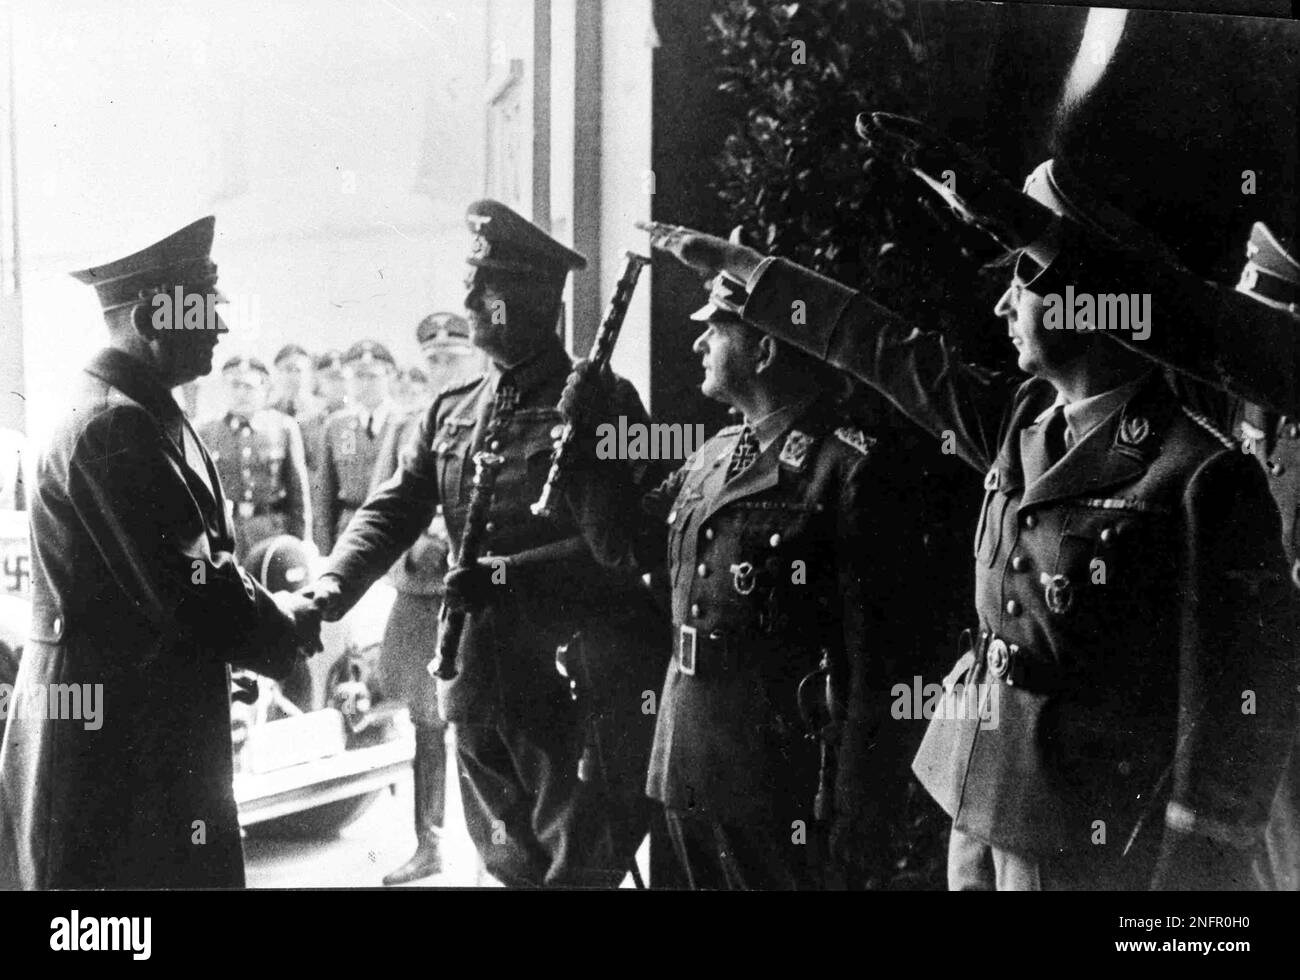 German Chancellor Adolf Hitler, left, shakes hands with Field Marshal General Wilhelm Keitel upon his arrival at the Sports Palace, Berlin, Jan. 8, 1943. Others seen saluting are Reichsfuhrer Heinrich Himmler, right, and Field Marshal Erhard Milch salutes with a Marshal's Baton, second right. (AP Photo) Banque D'Images